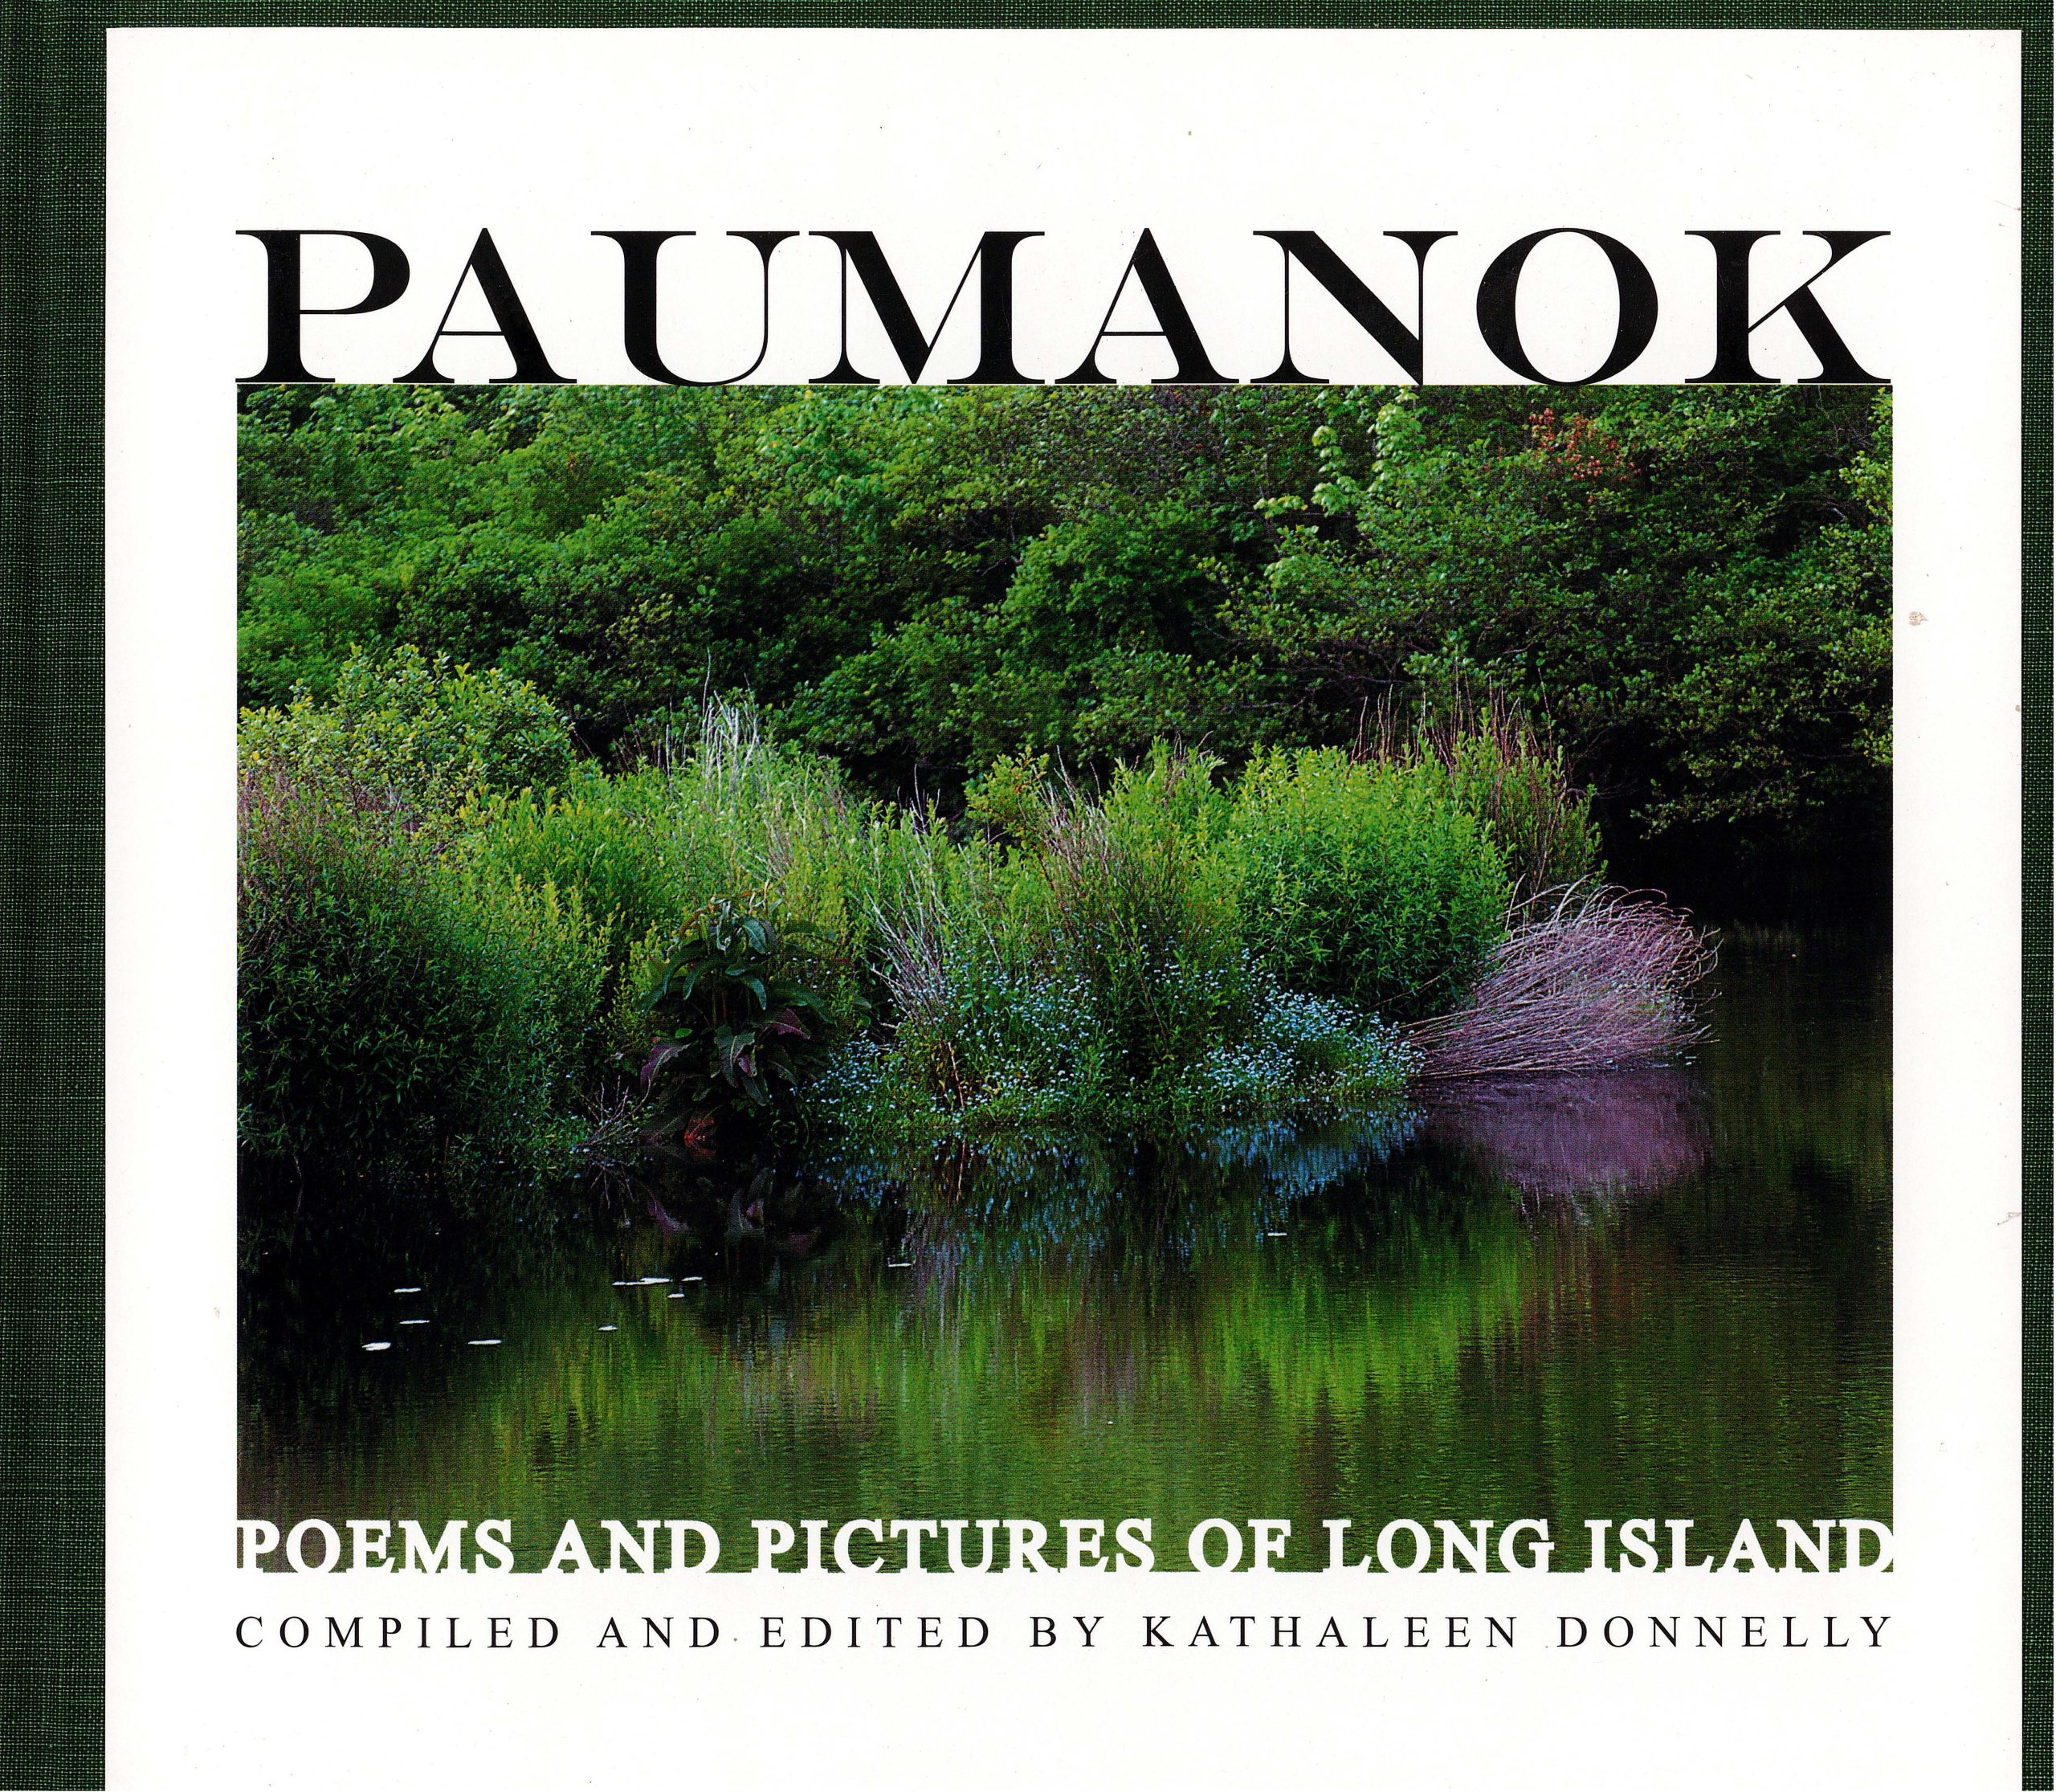 Paumanok: Poems and Pictures of Long Island